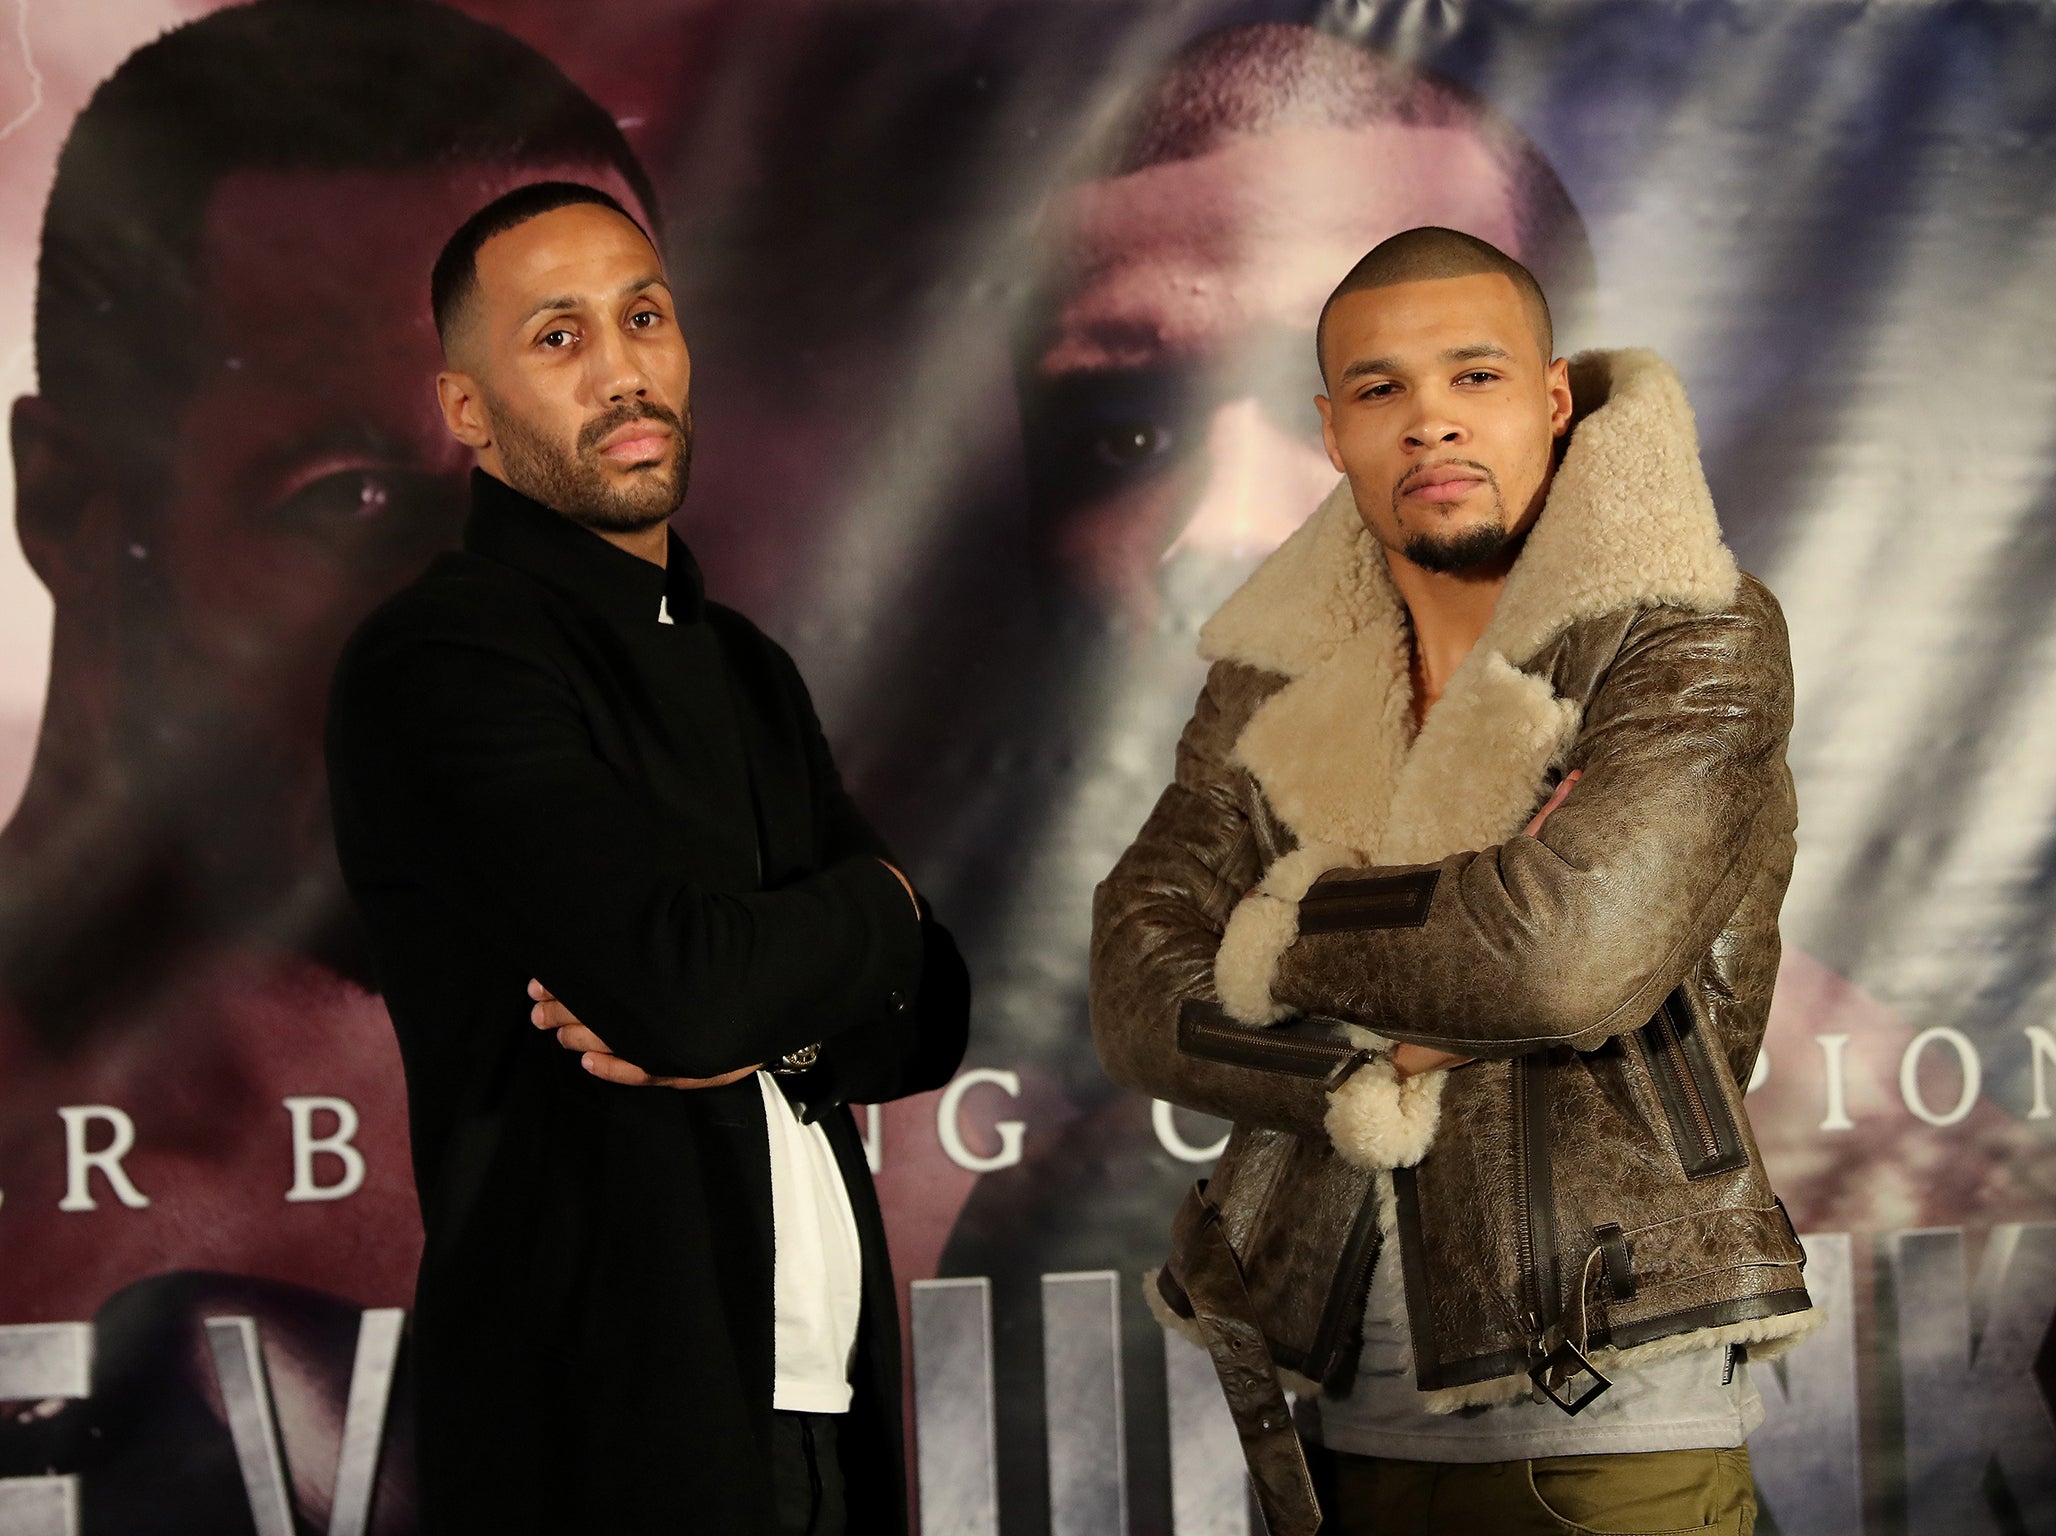 James DeGale and Chris Eubank Jr will settle their grudge on Saturday